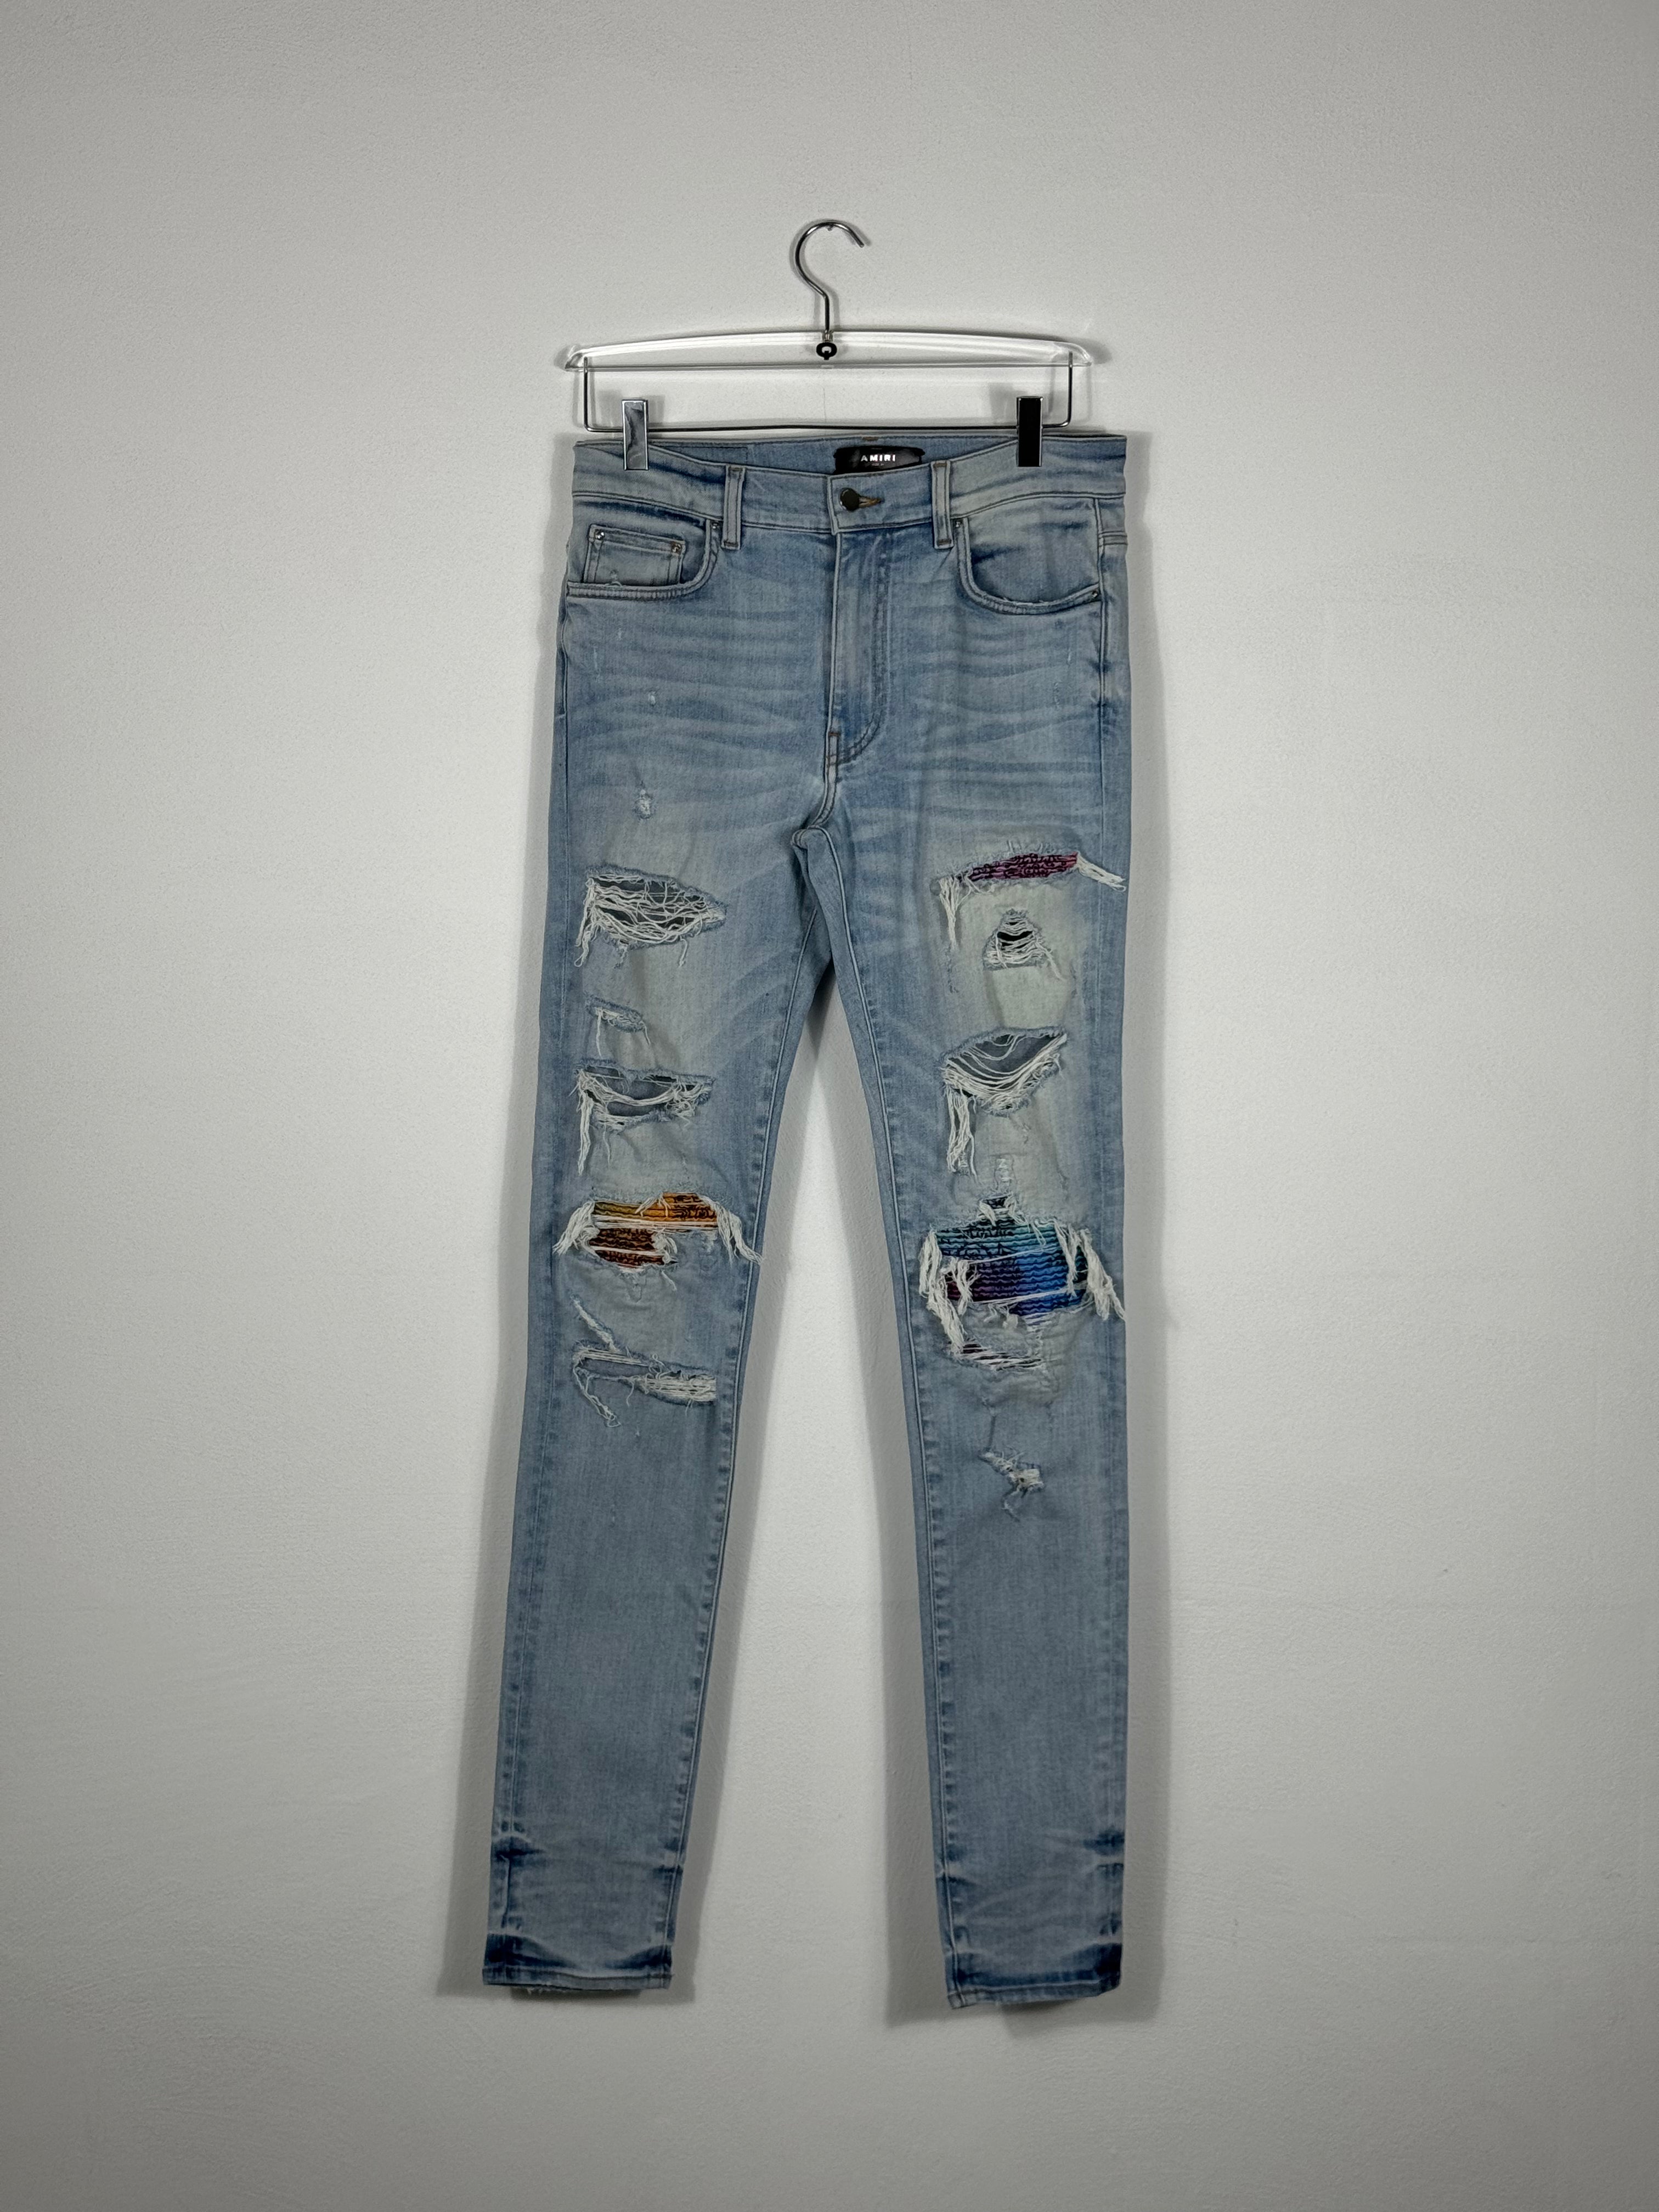 Skinny Jeans With Ripped Details by Sfera Ebbasta